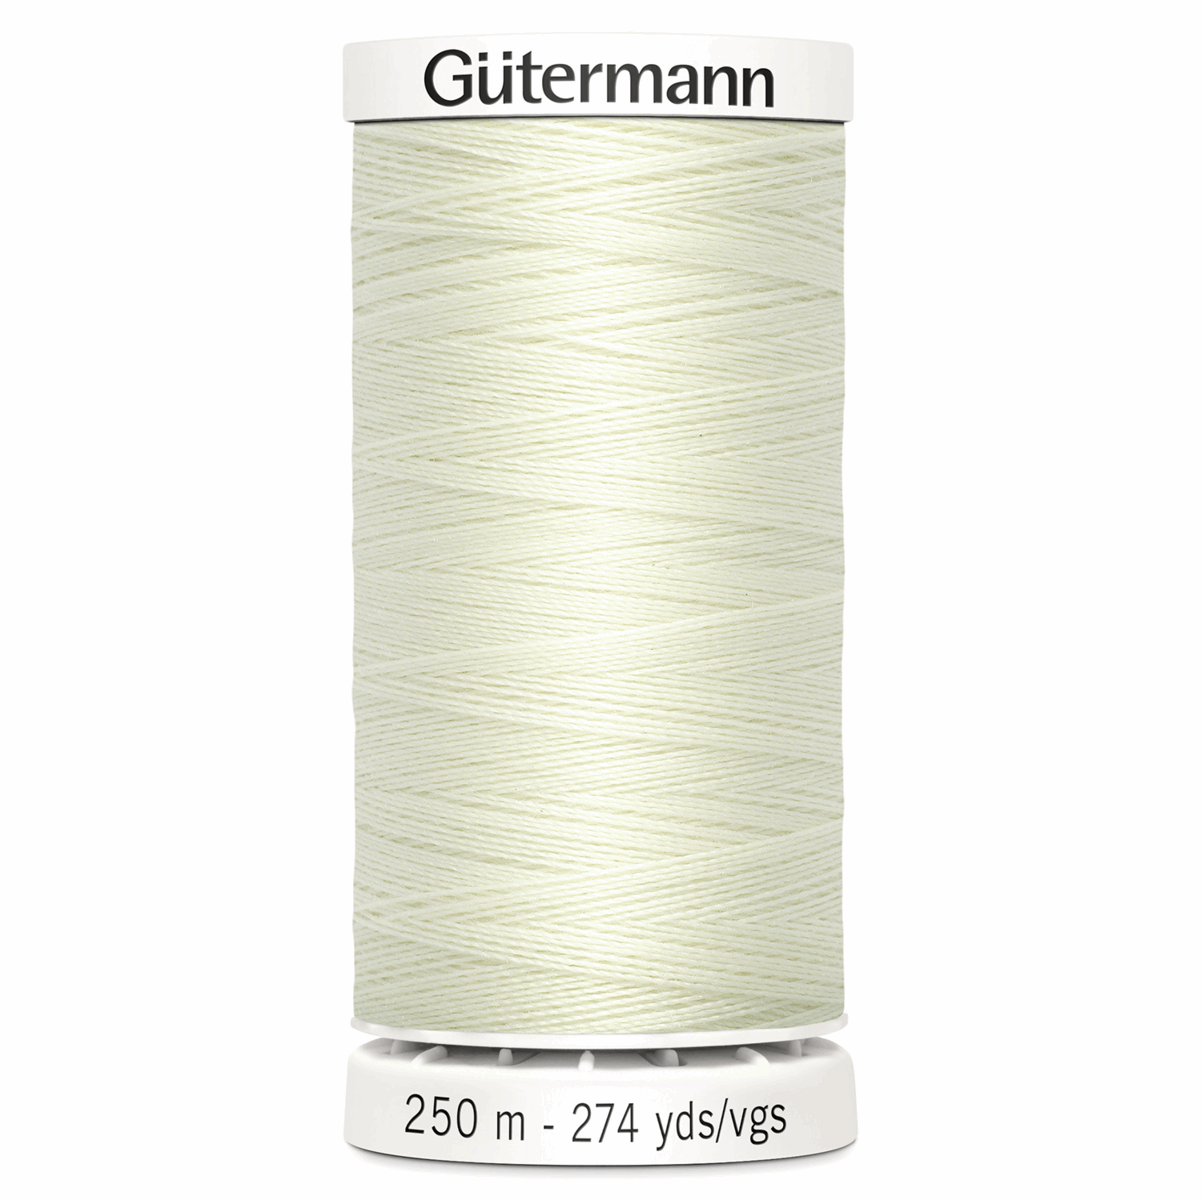 250m size Sew-All Polyester Sewing Thread Ivory from Jaycotts Sewing Supplies